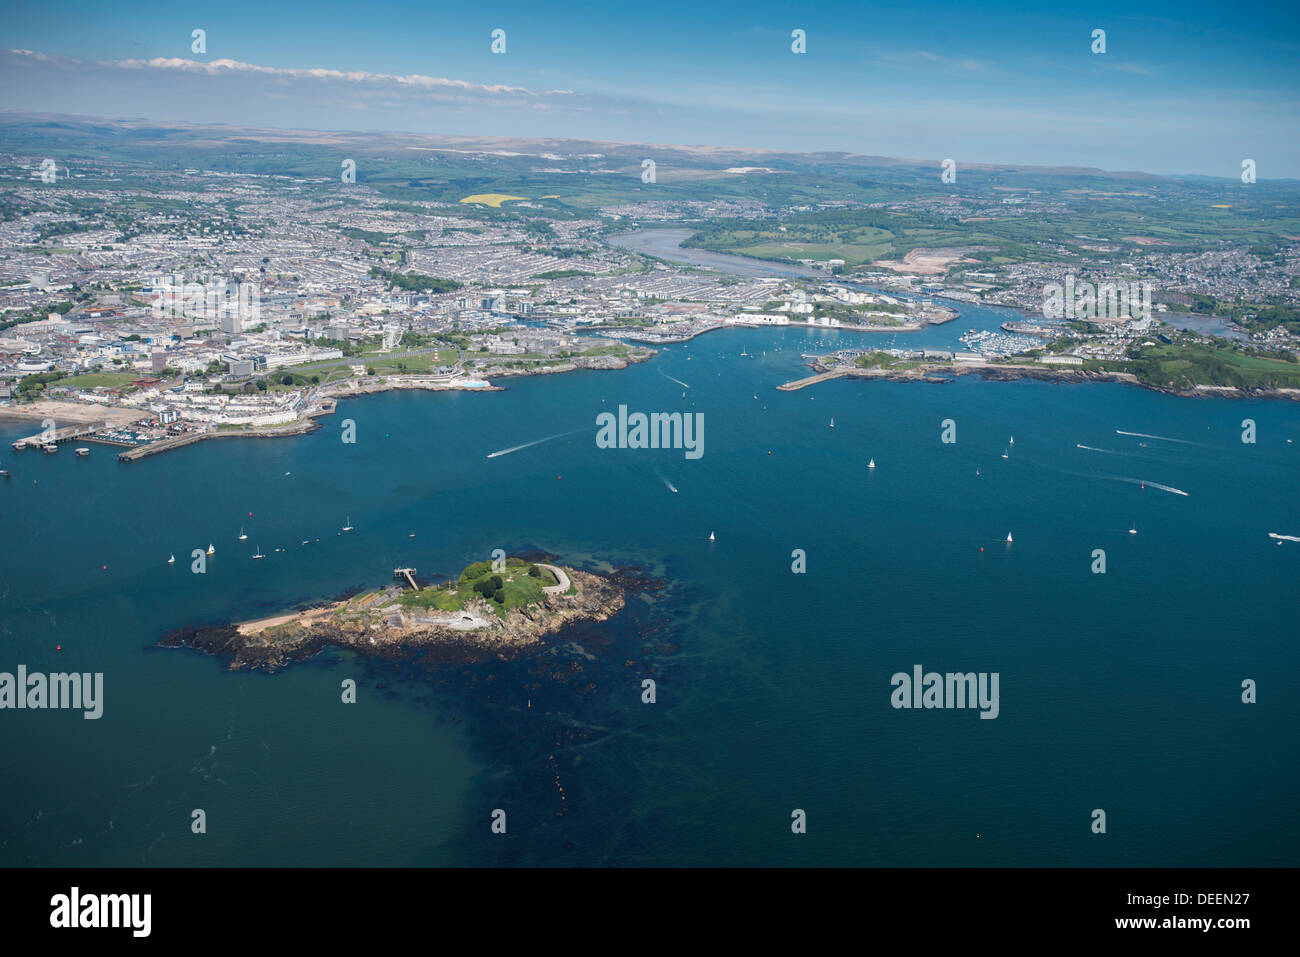 Plymouth avec Drakes Island in foreground, Devon, Angleterre, Royaume-Uni, Europe Banque D'Images